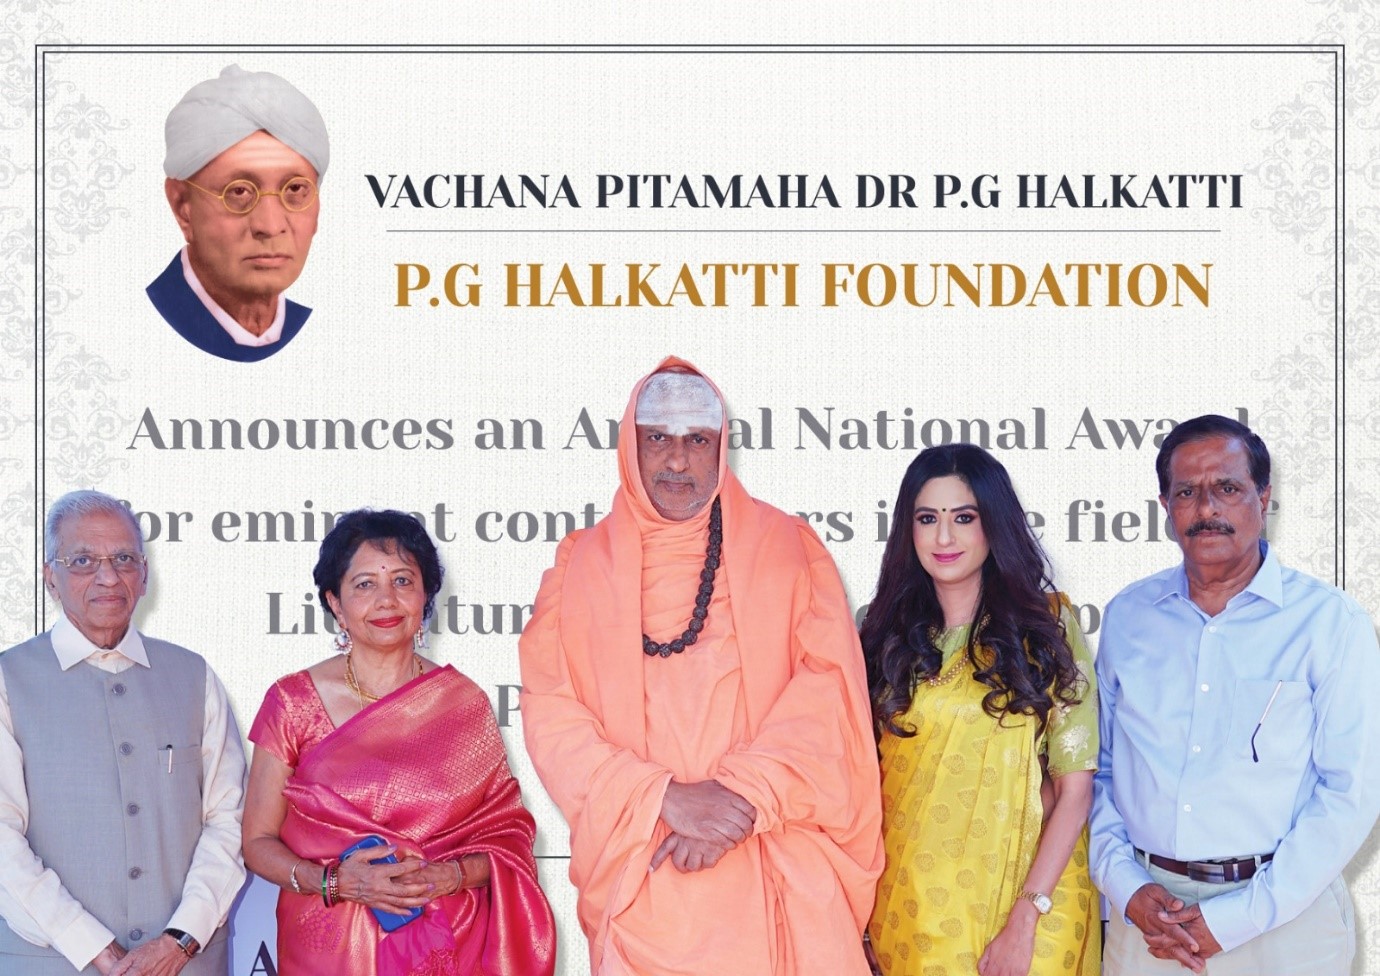 pavithra-halkatti-president-of-dr-pg-halkatti-foundation-announces-an-annual-national-award-for-eminent-contributors-in-the-field-of-literature-academics-philanthropy